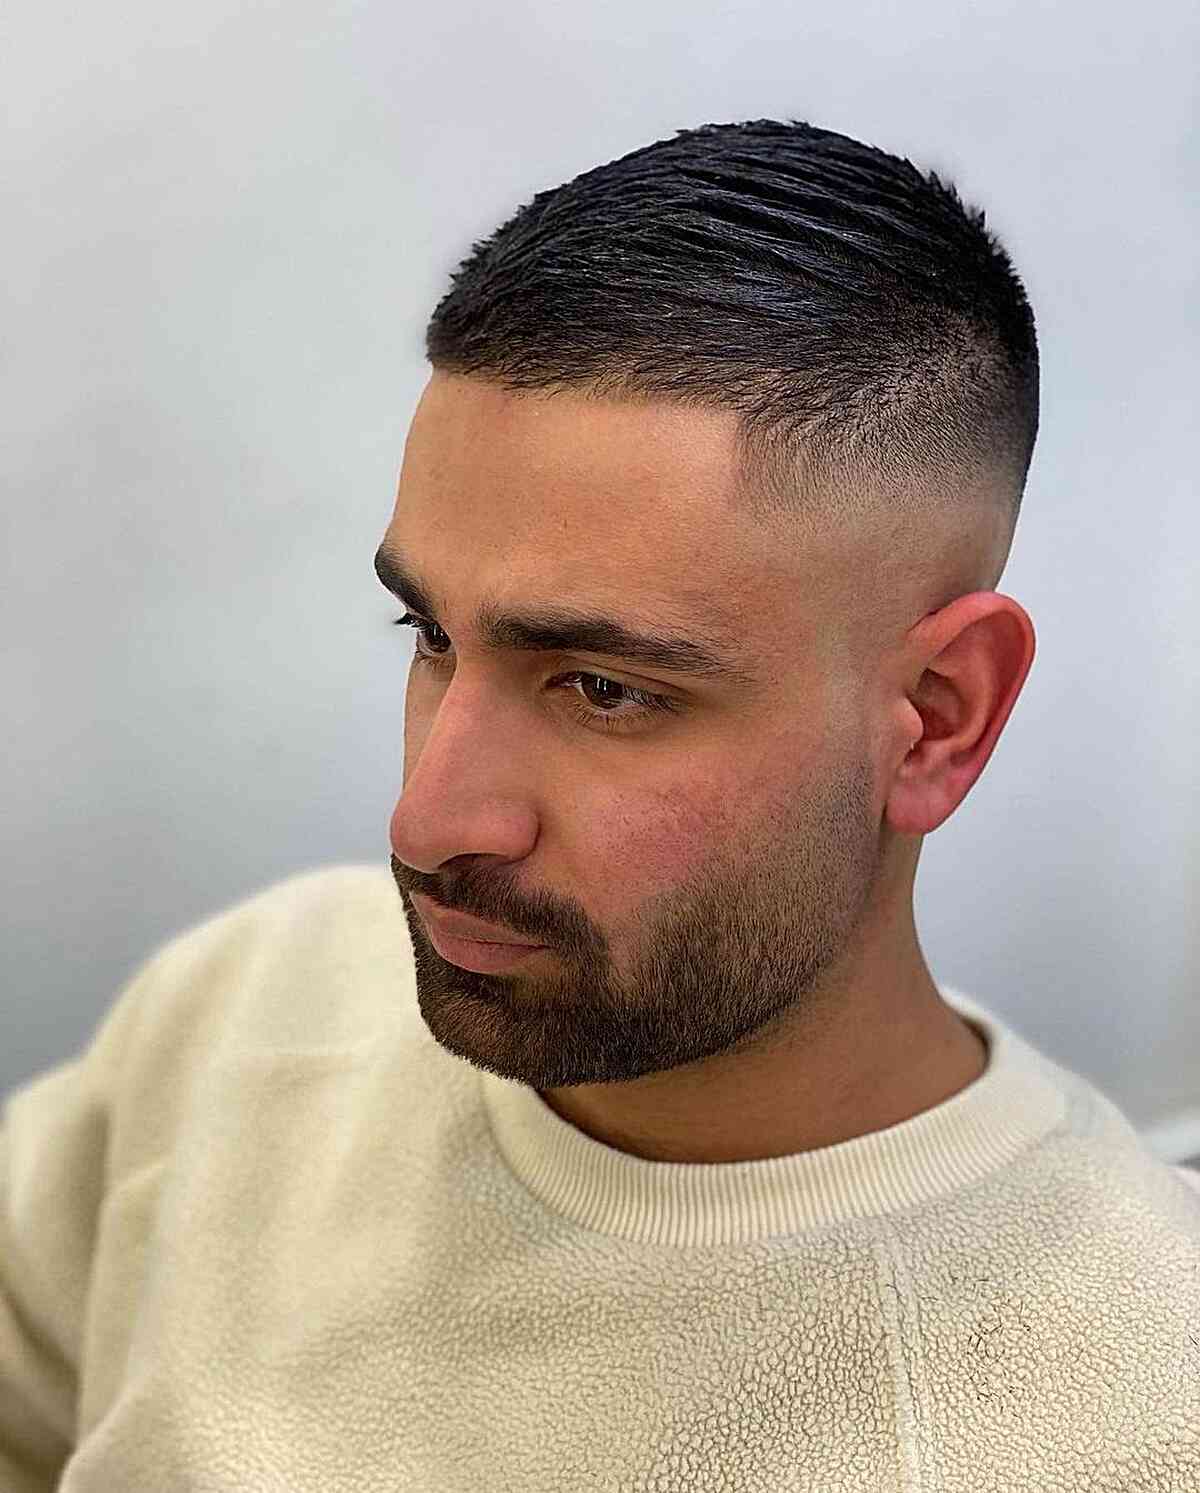 Bald Fade for High and Tight Haircut